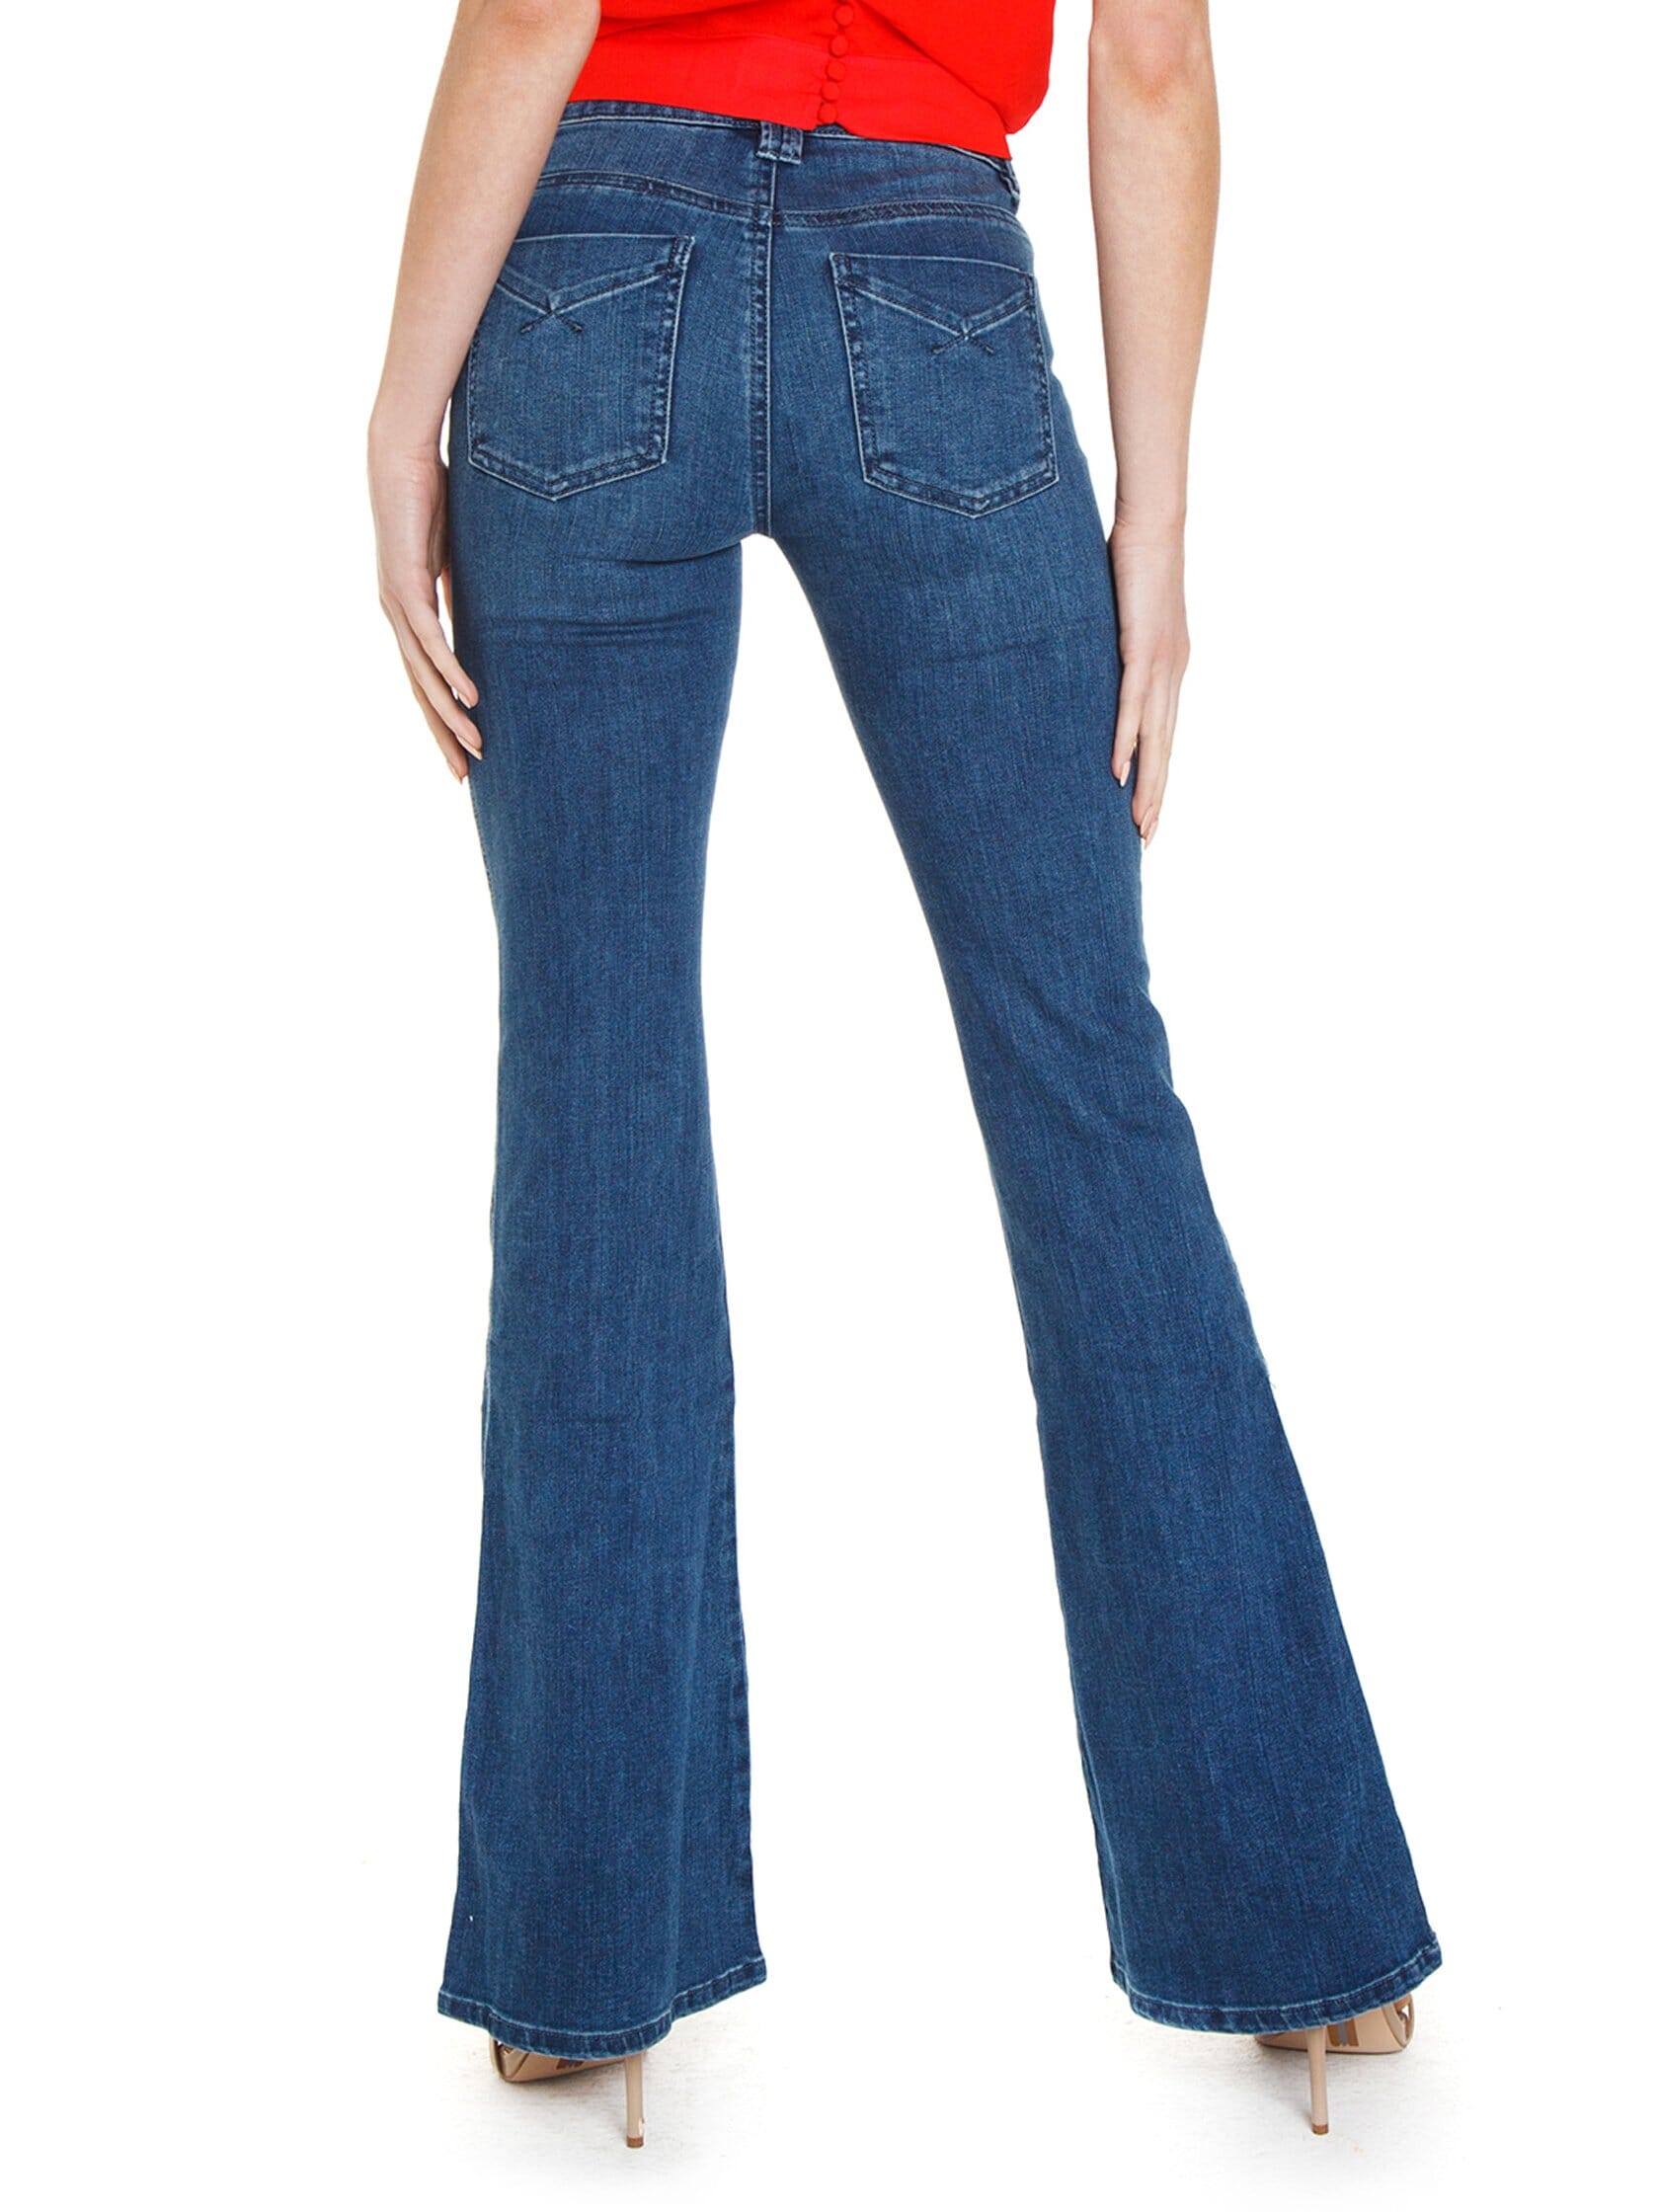 Unpublished Denim | Janet High Rise Flare Jeans in Double Trouble ...